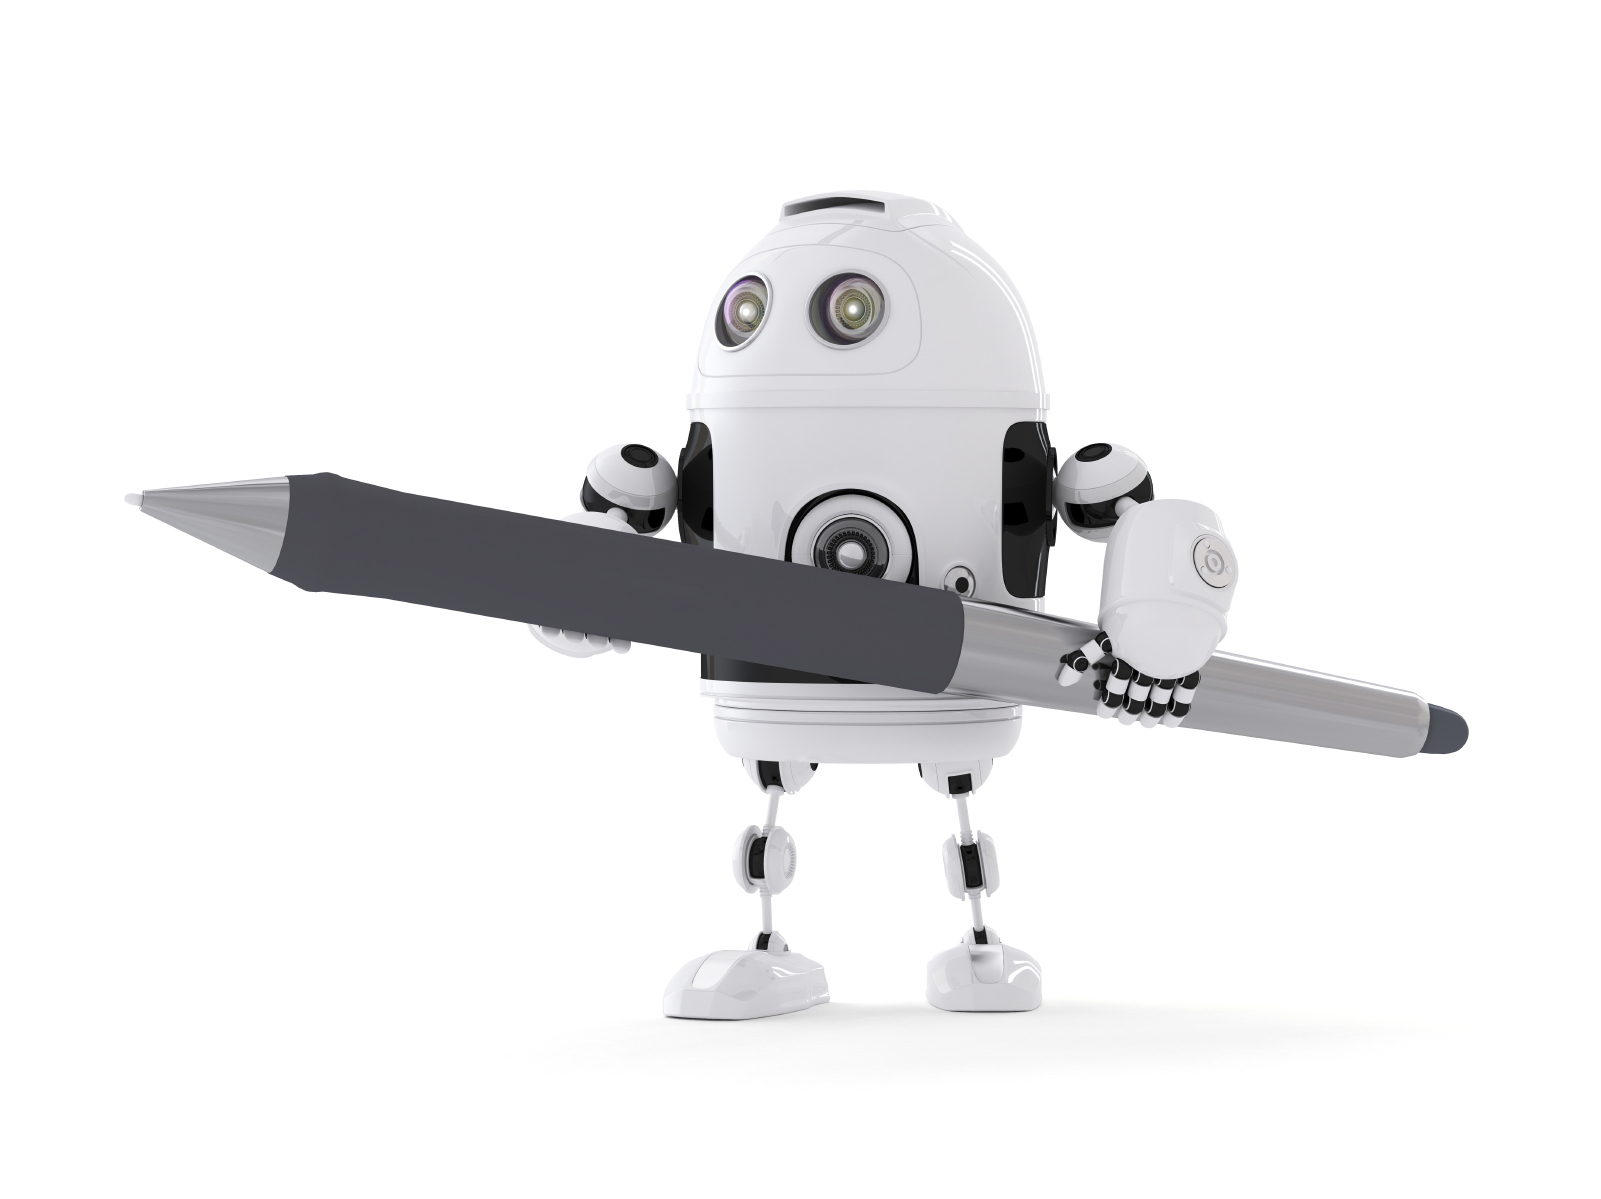 Robot with Pen